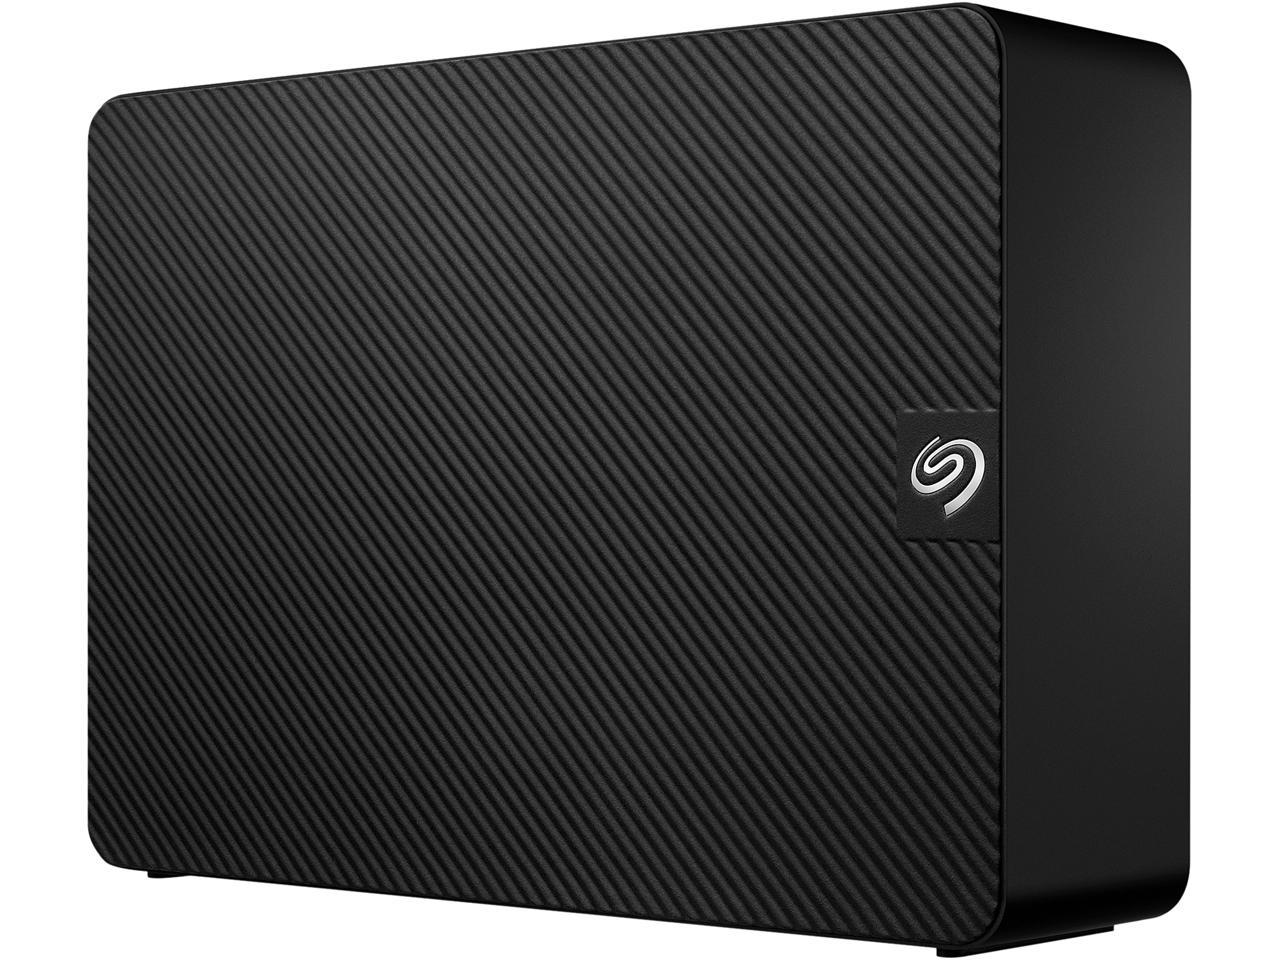 16TB Seagate Expansion External Hard Drive HDD - USB 3.0, with Rescue Data Recovery Services $250